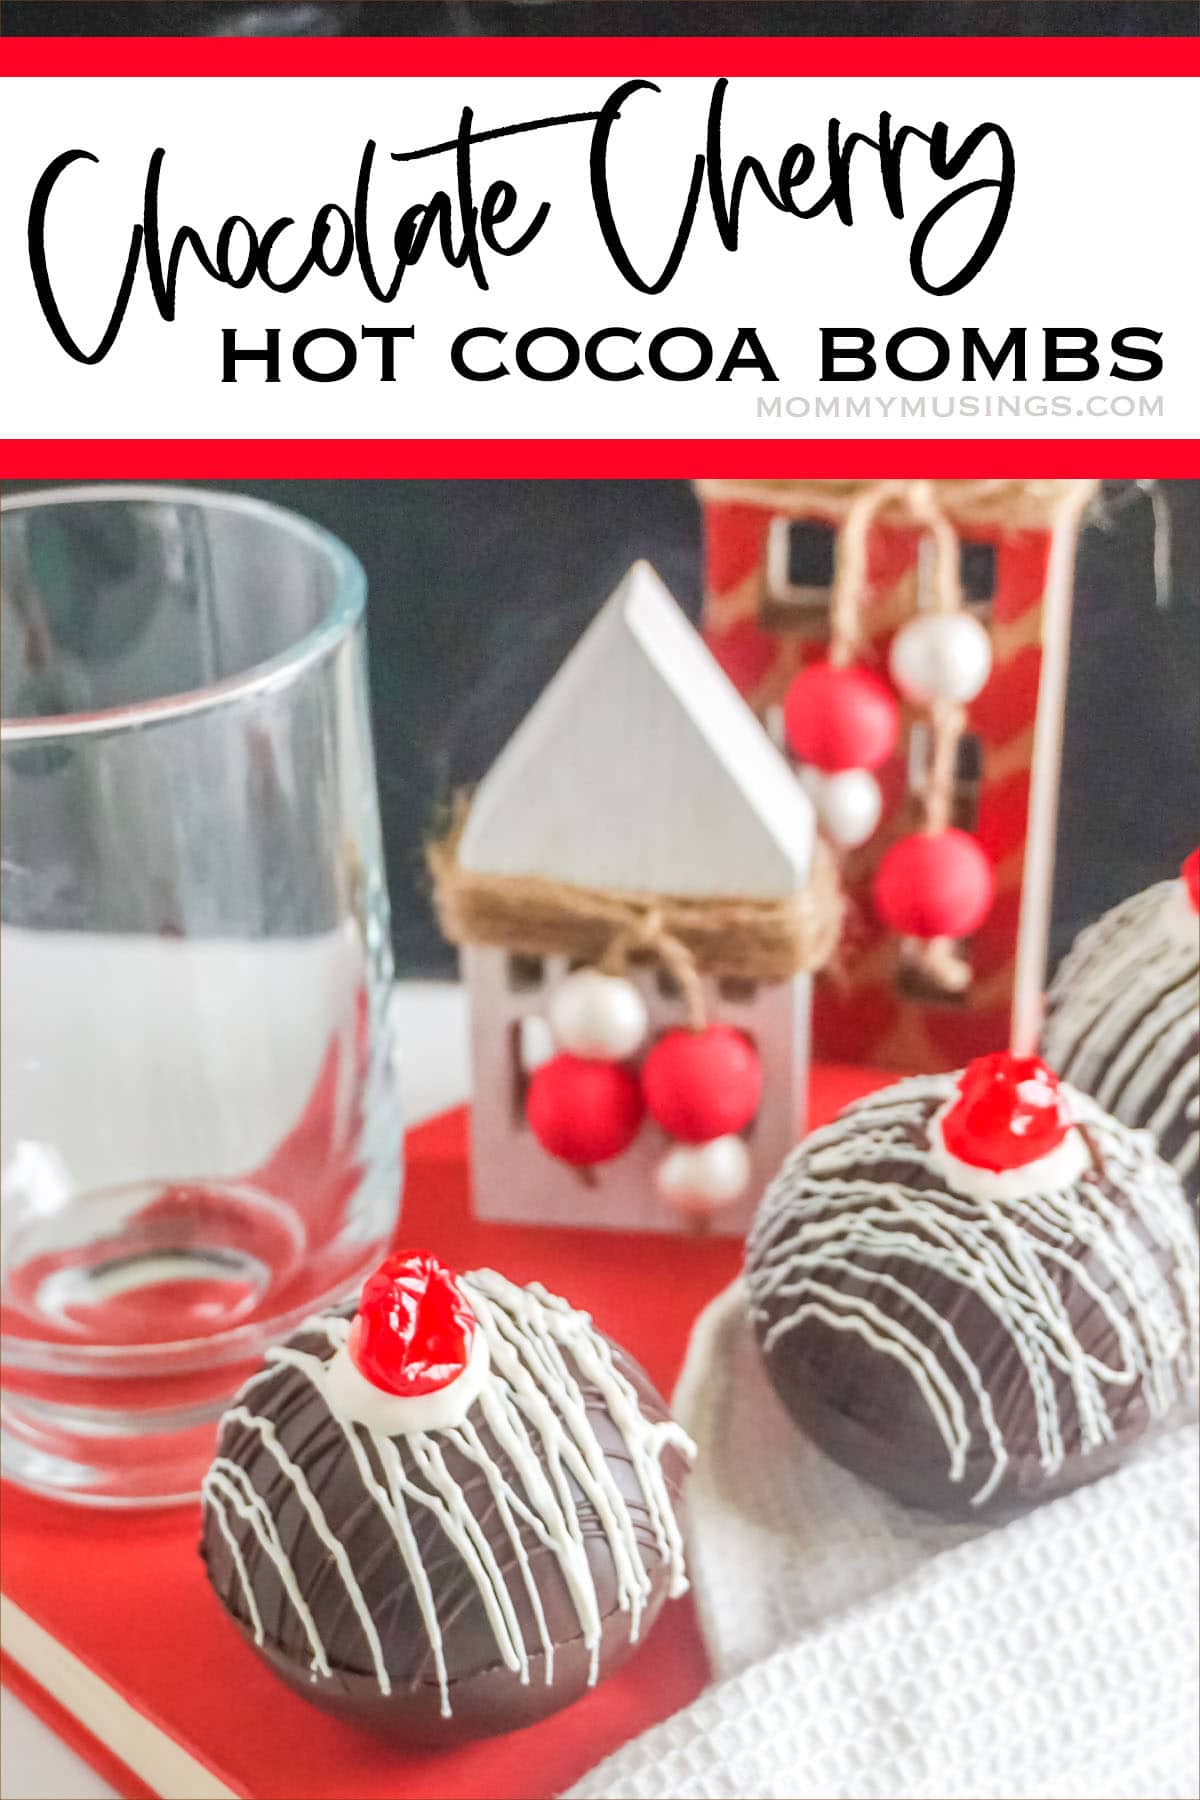 cherry topped hot cocoa bombs with text which reads chocolate cherry hot cocoa bombs